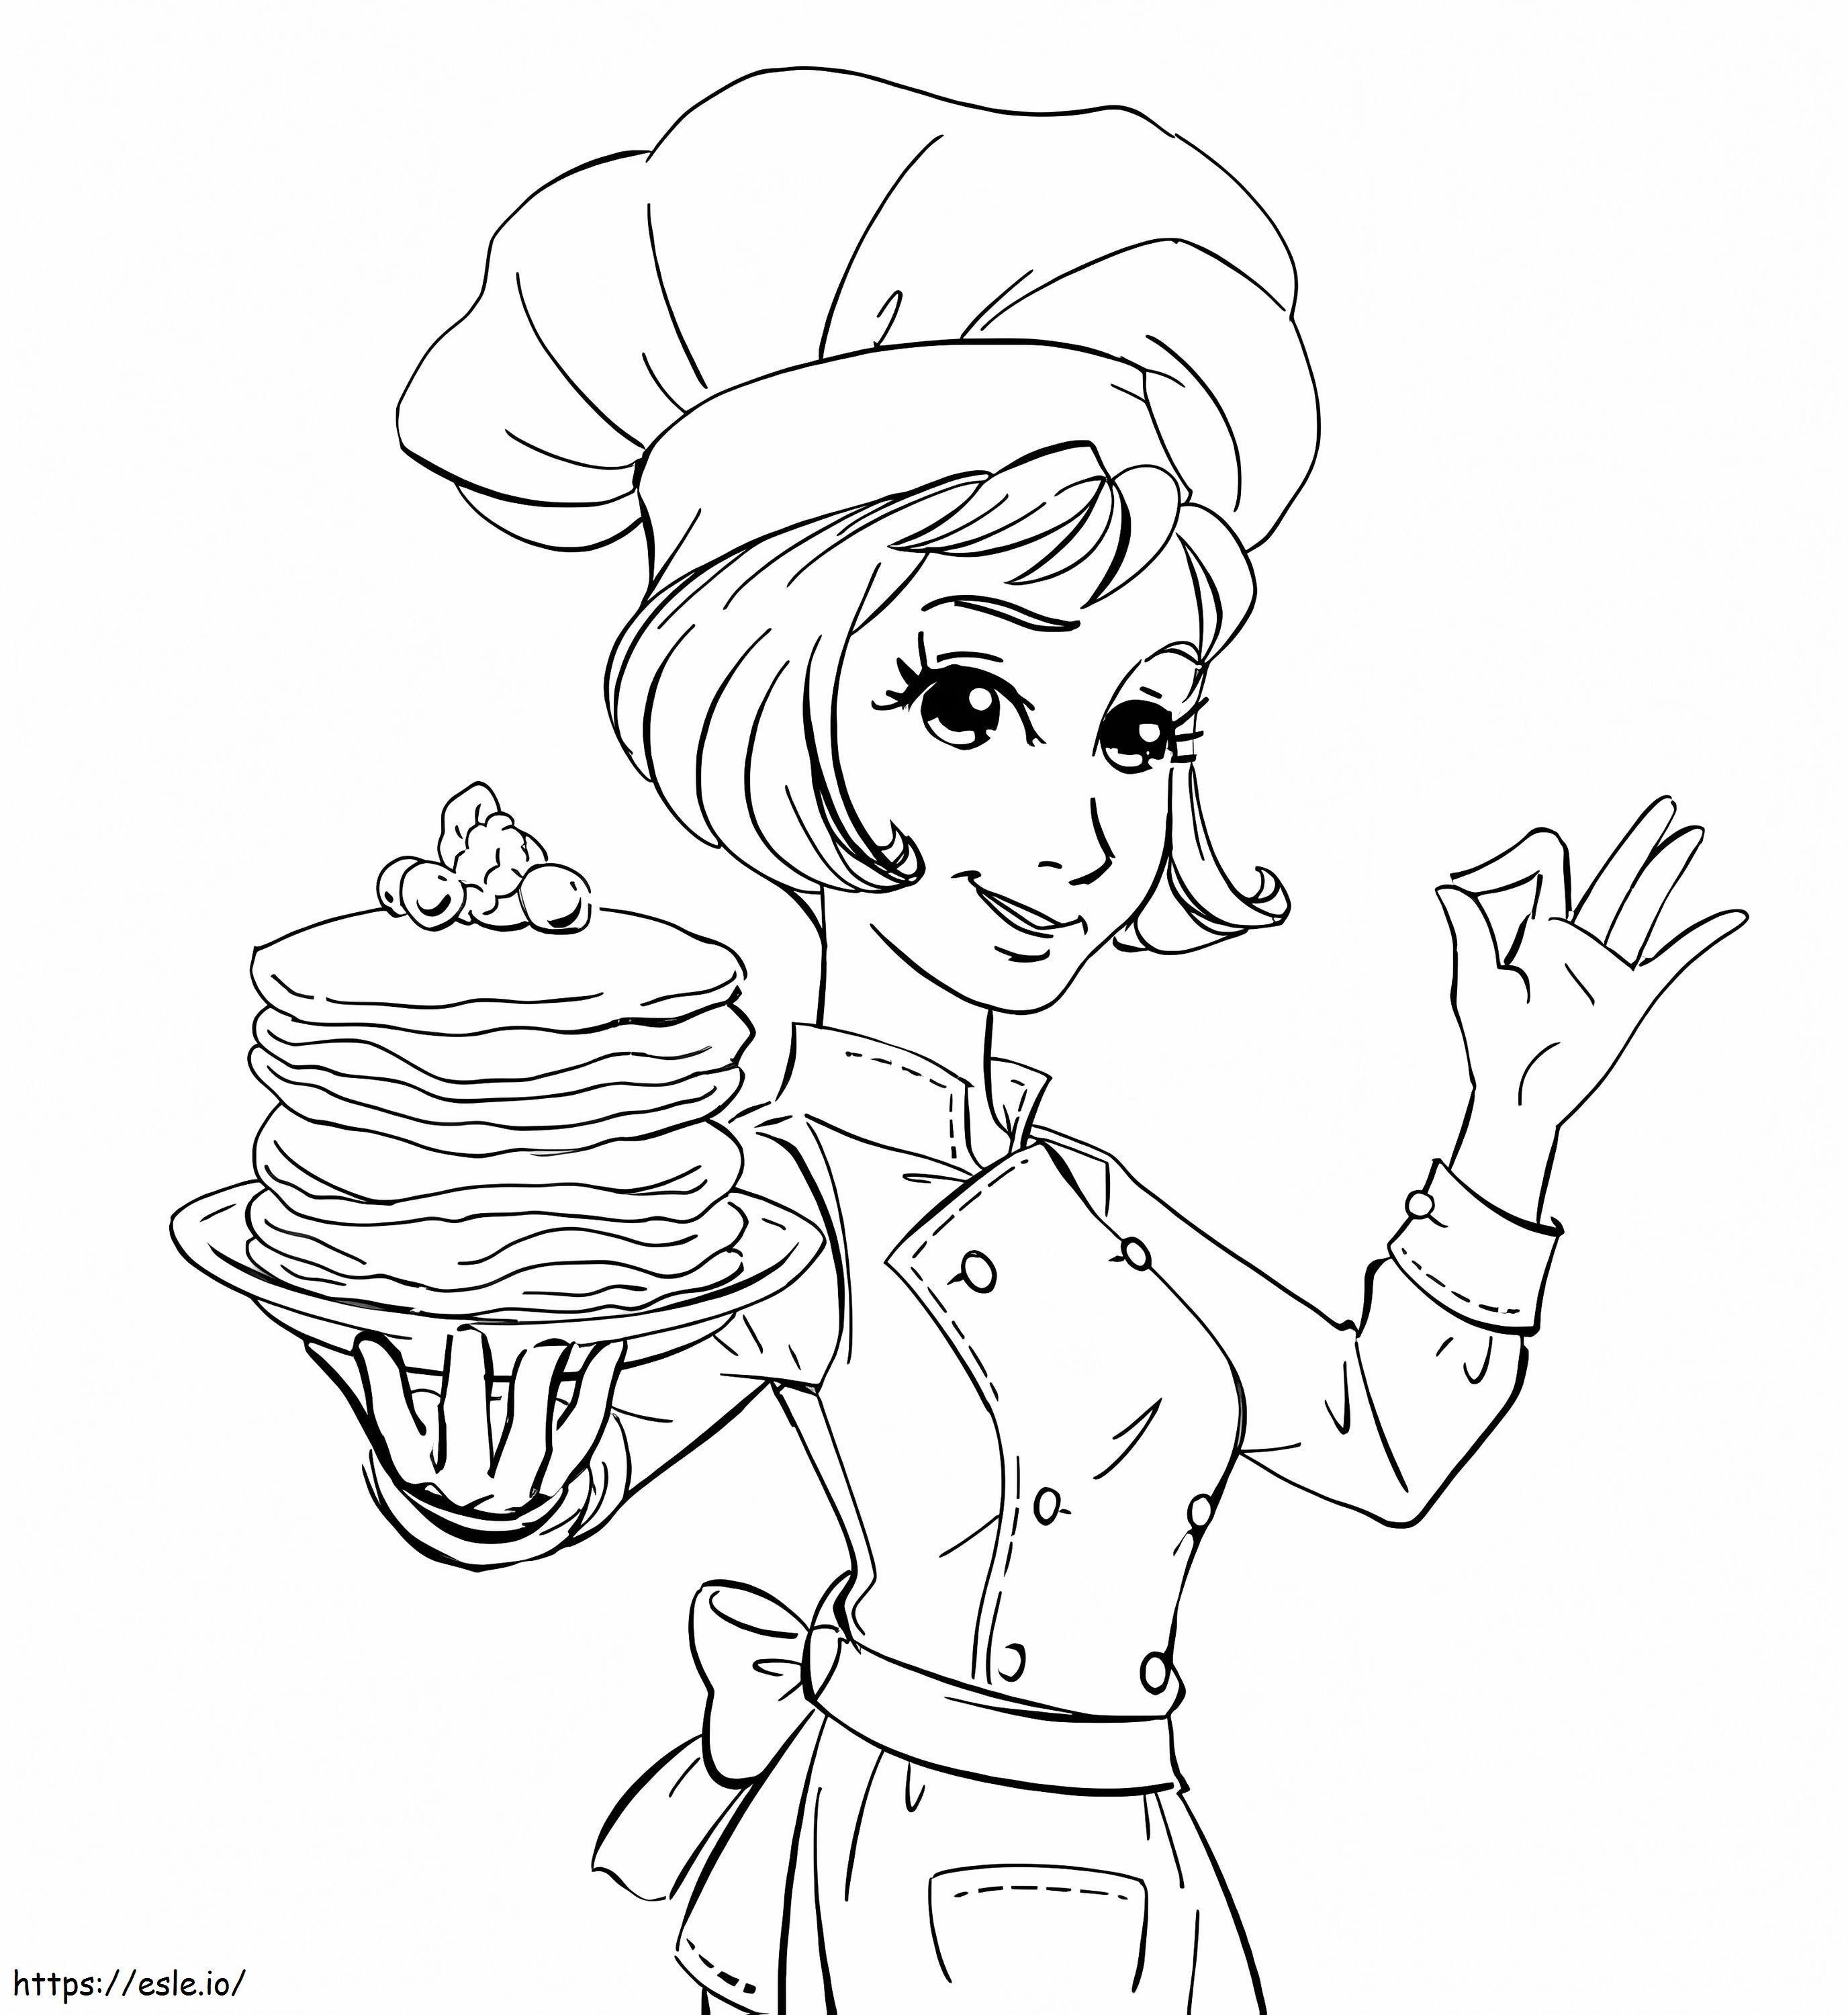 Girl Chef Cooking Pancakes coloring page